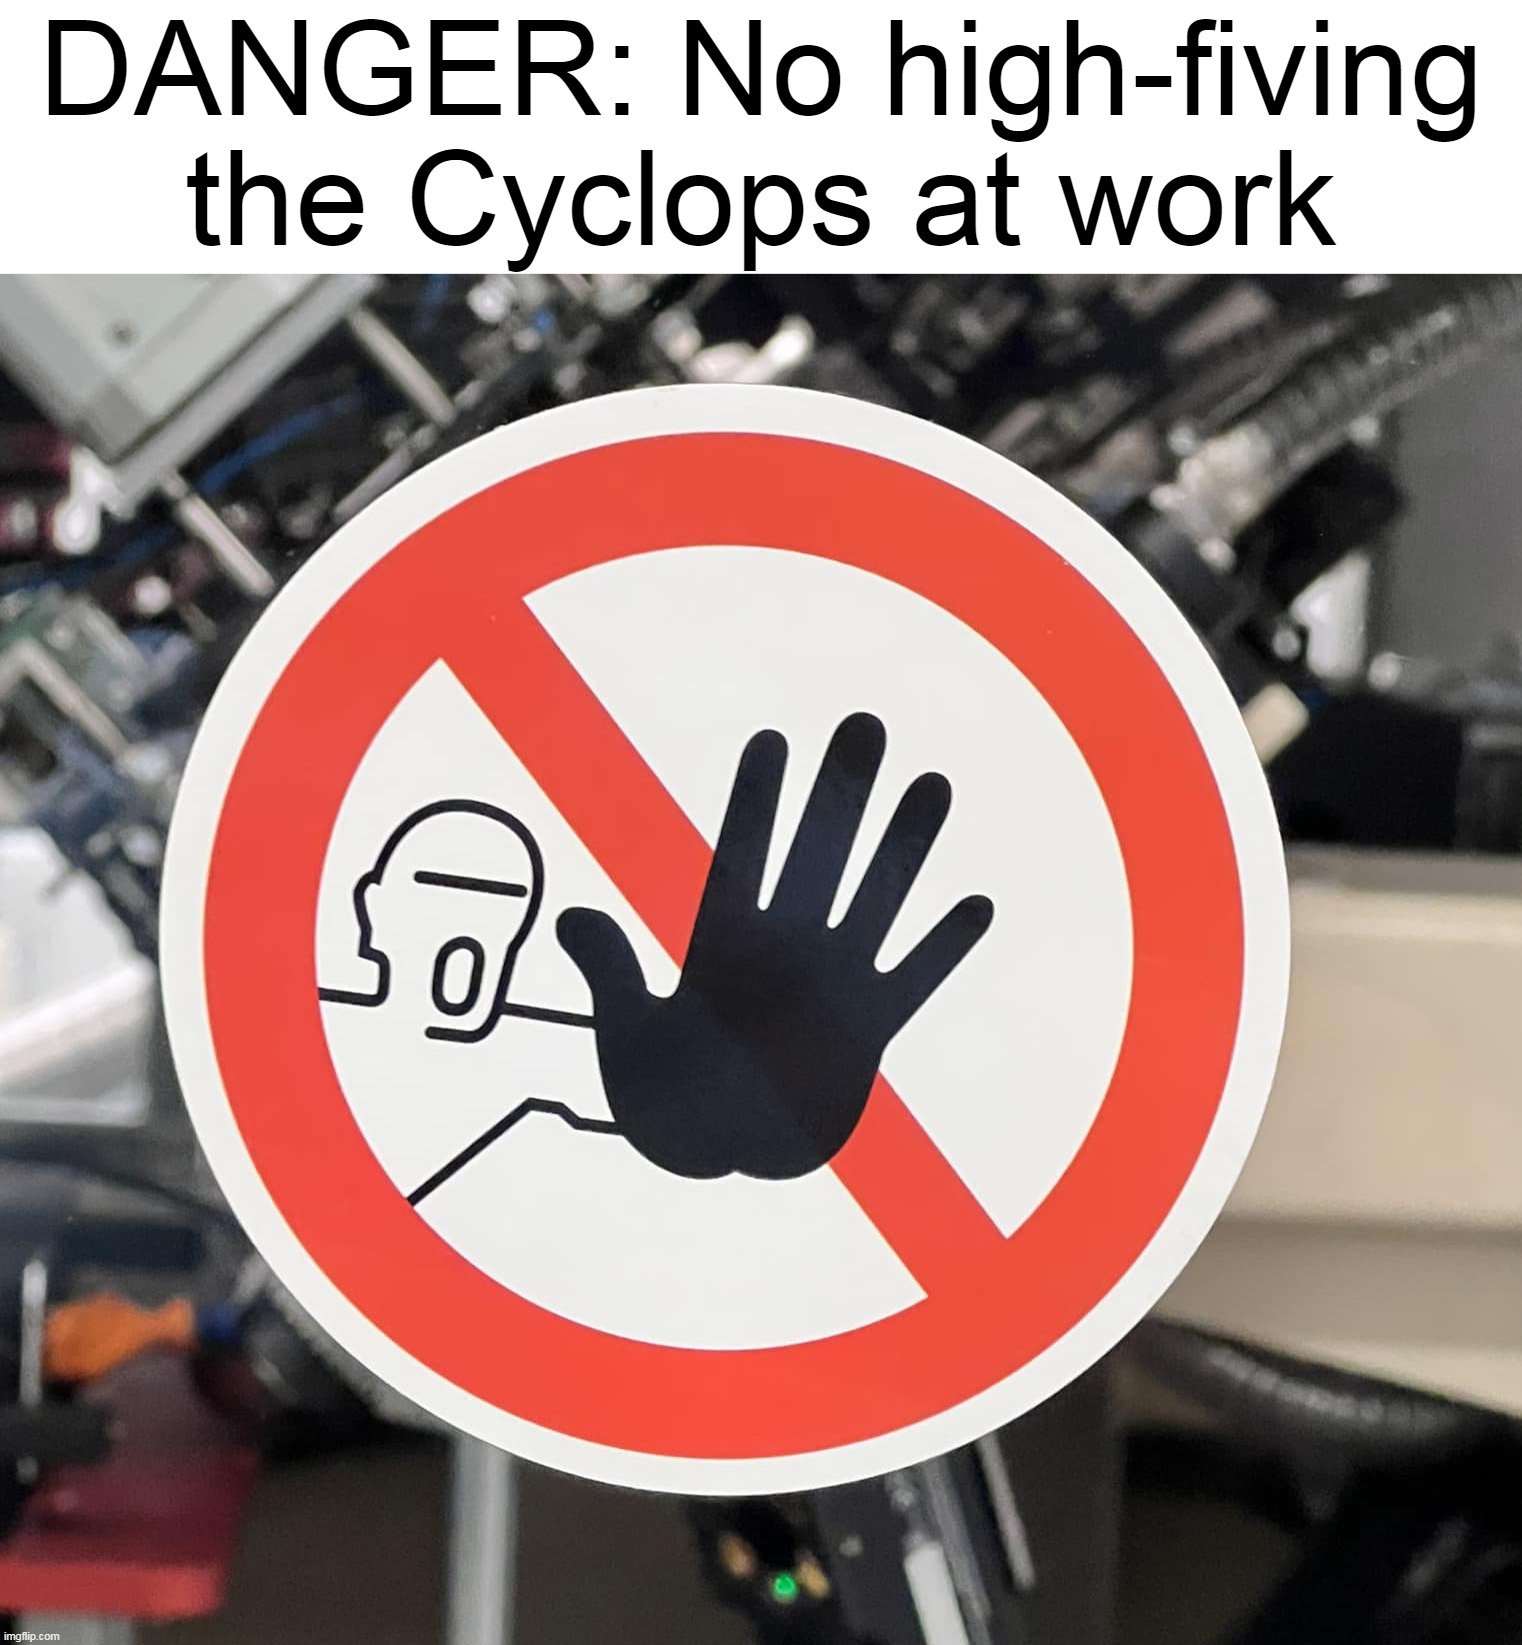  DANGER: No high-fiving the Cyclops at work | image tagged in meme,memes,humor,funny,signs | made w/ Imgflip meme maker